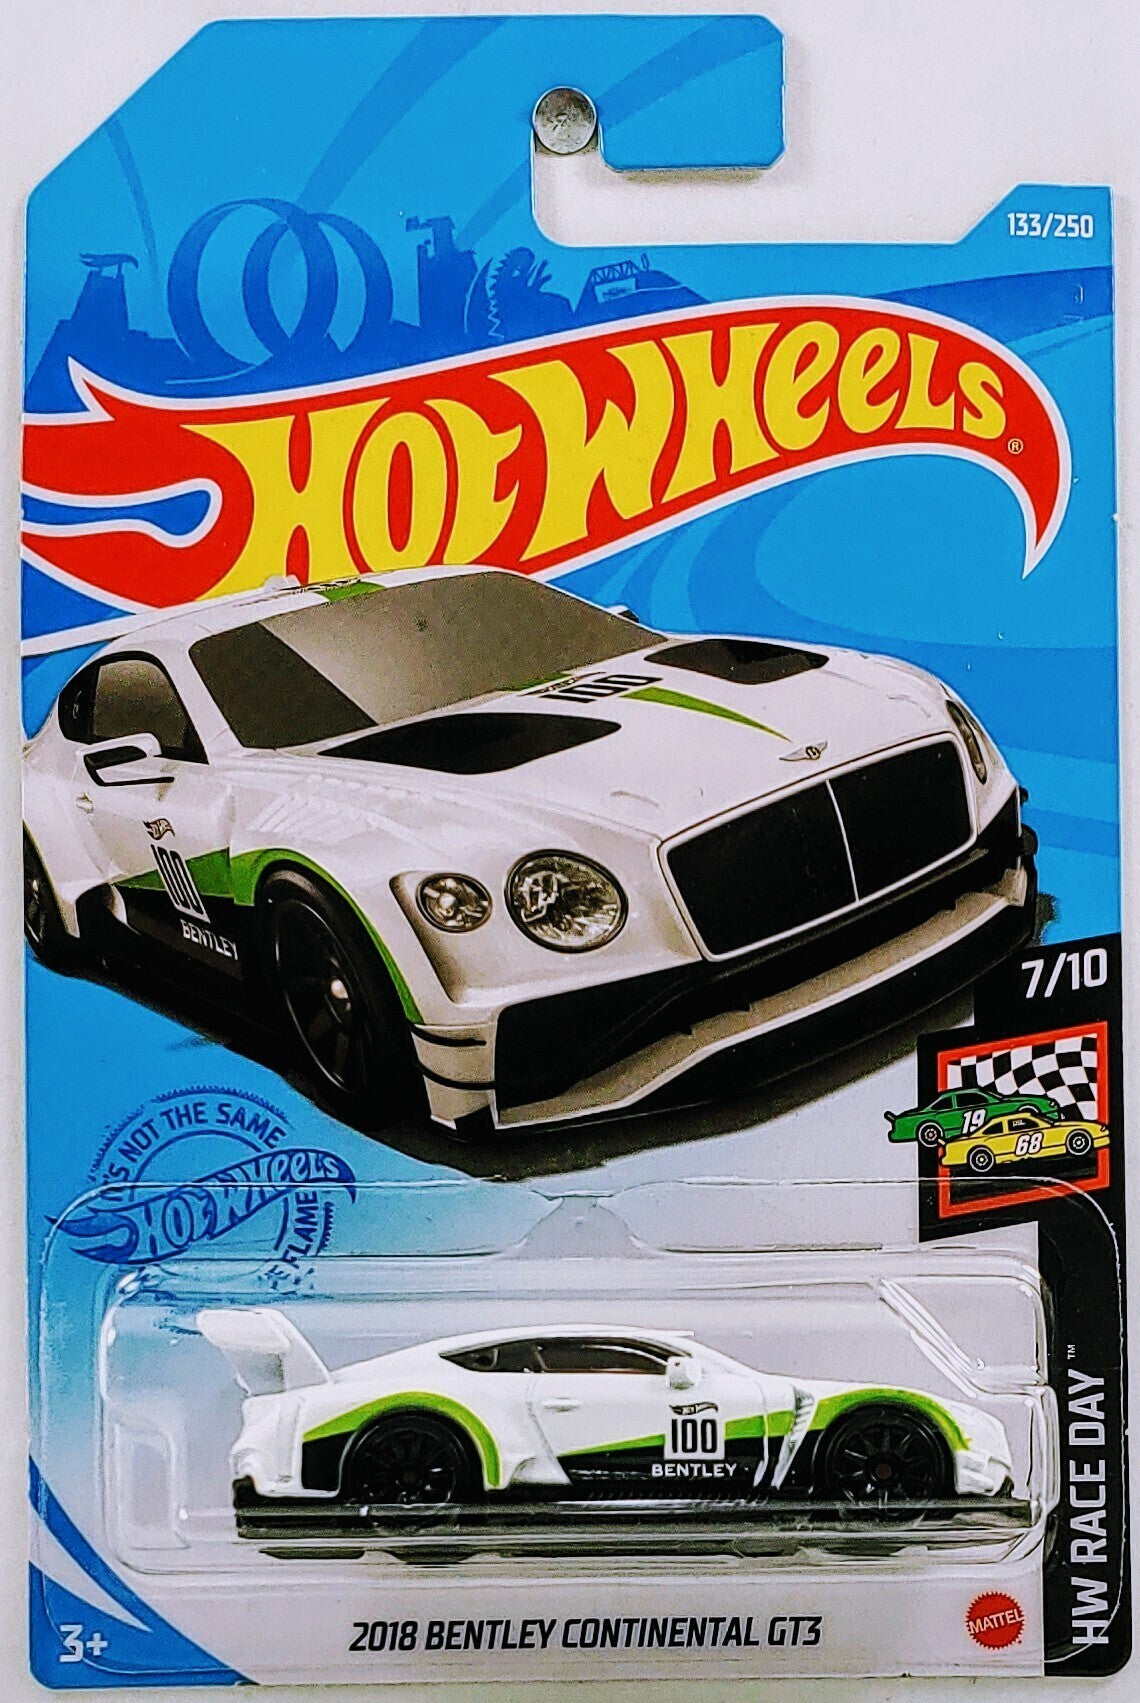 Hot Wheels 2021 - Collector # 133/250 - HW Race Day 7/10 - 2018 Bentley Continental GT3 - White - IC